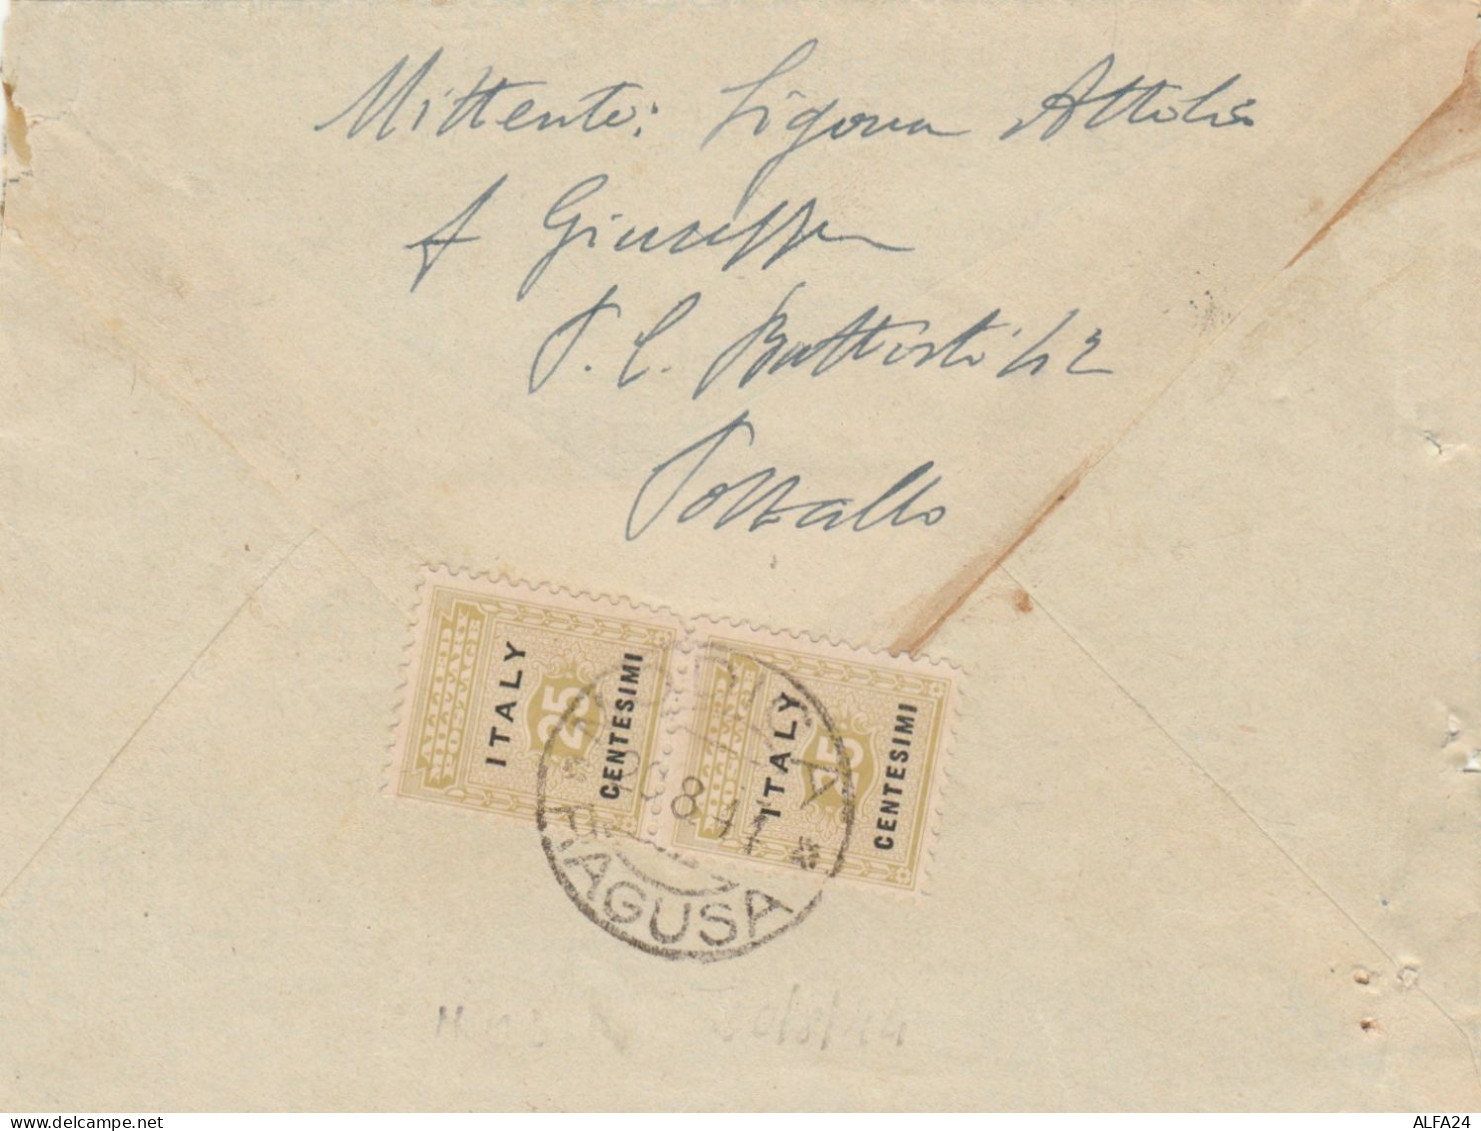 LETTERA 1944 2X25 ALLIED MILITARY POSTAGE TIMBRO RAGUSA MODICA (RY4285 - Occ. Anglo-américaine: Sicile